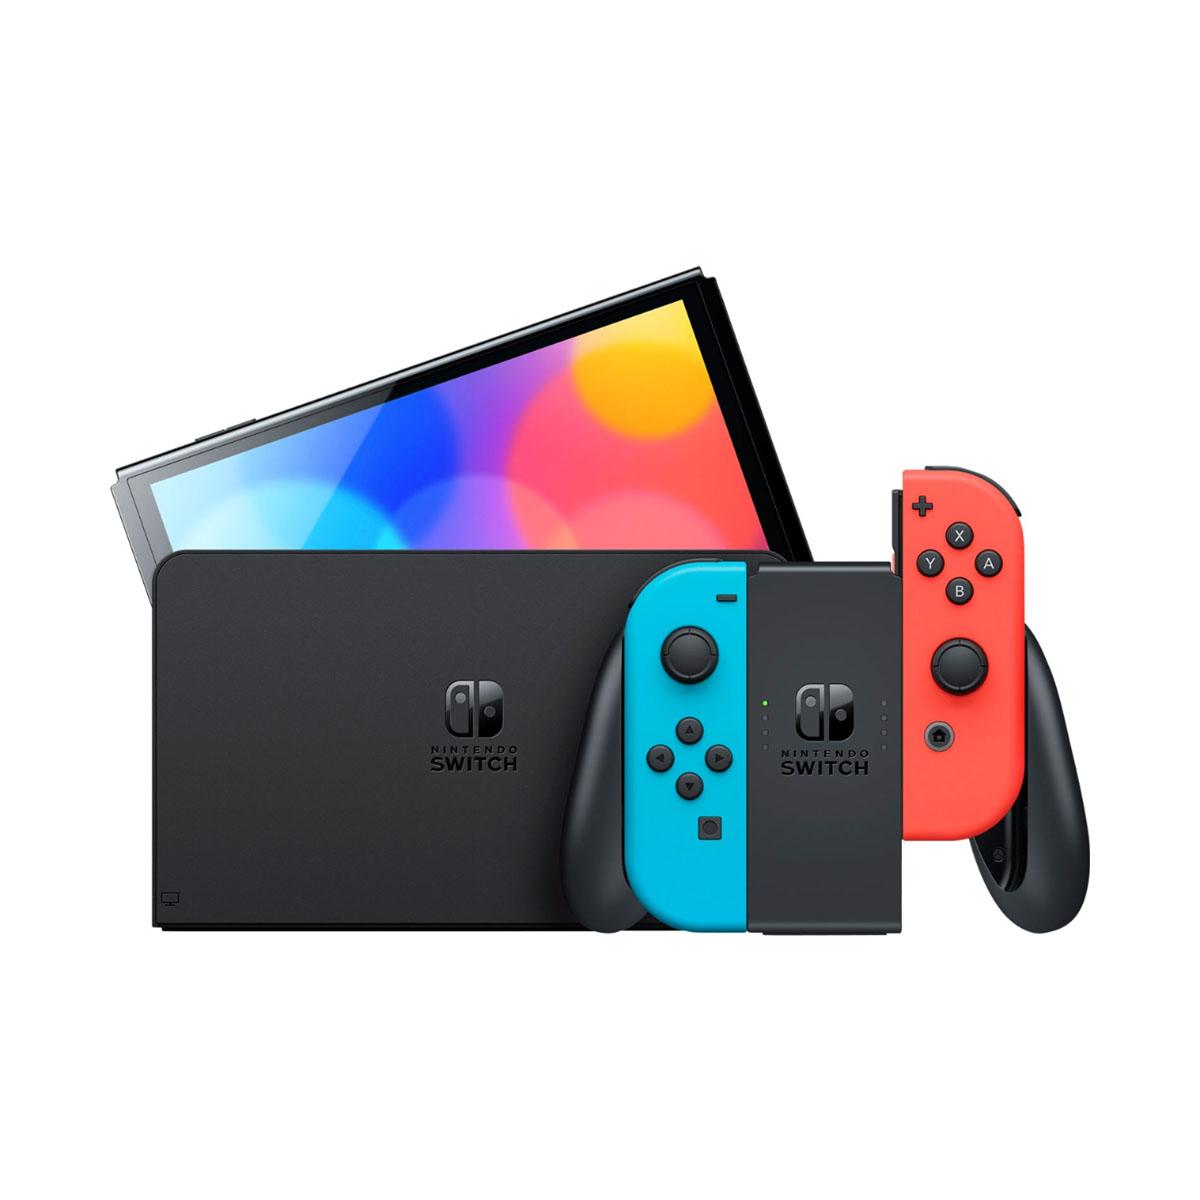 Nintendo Switch (OLED Model) - Neon Red And Neon Blue Joy-Con